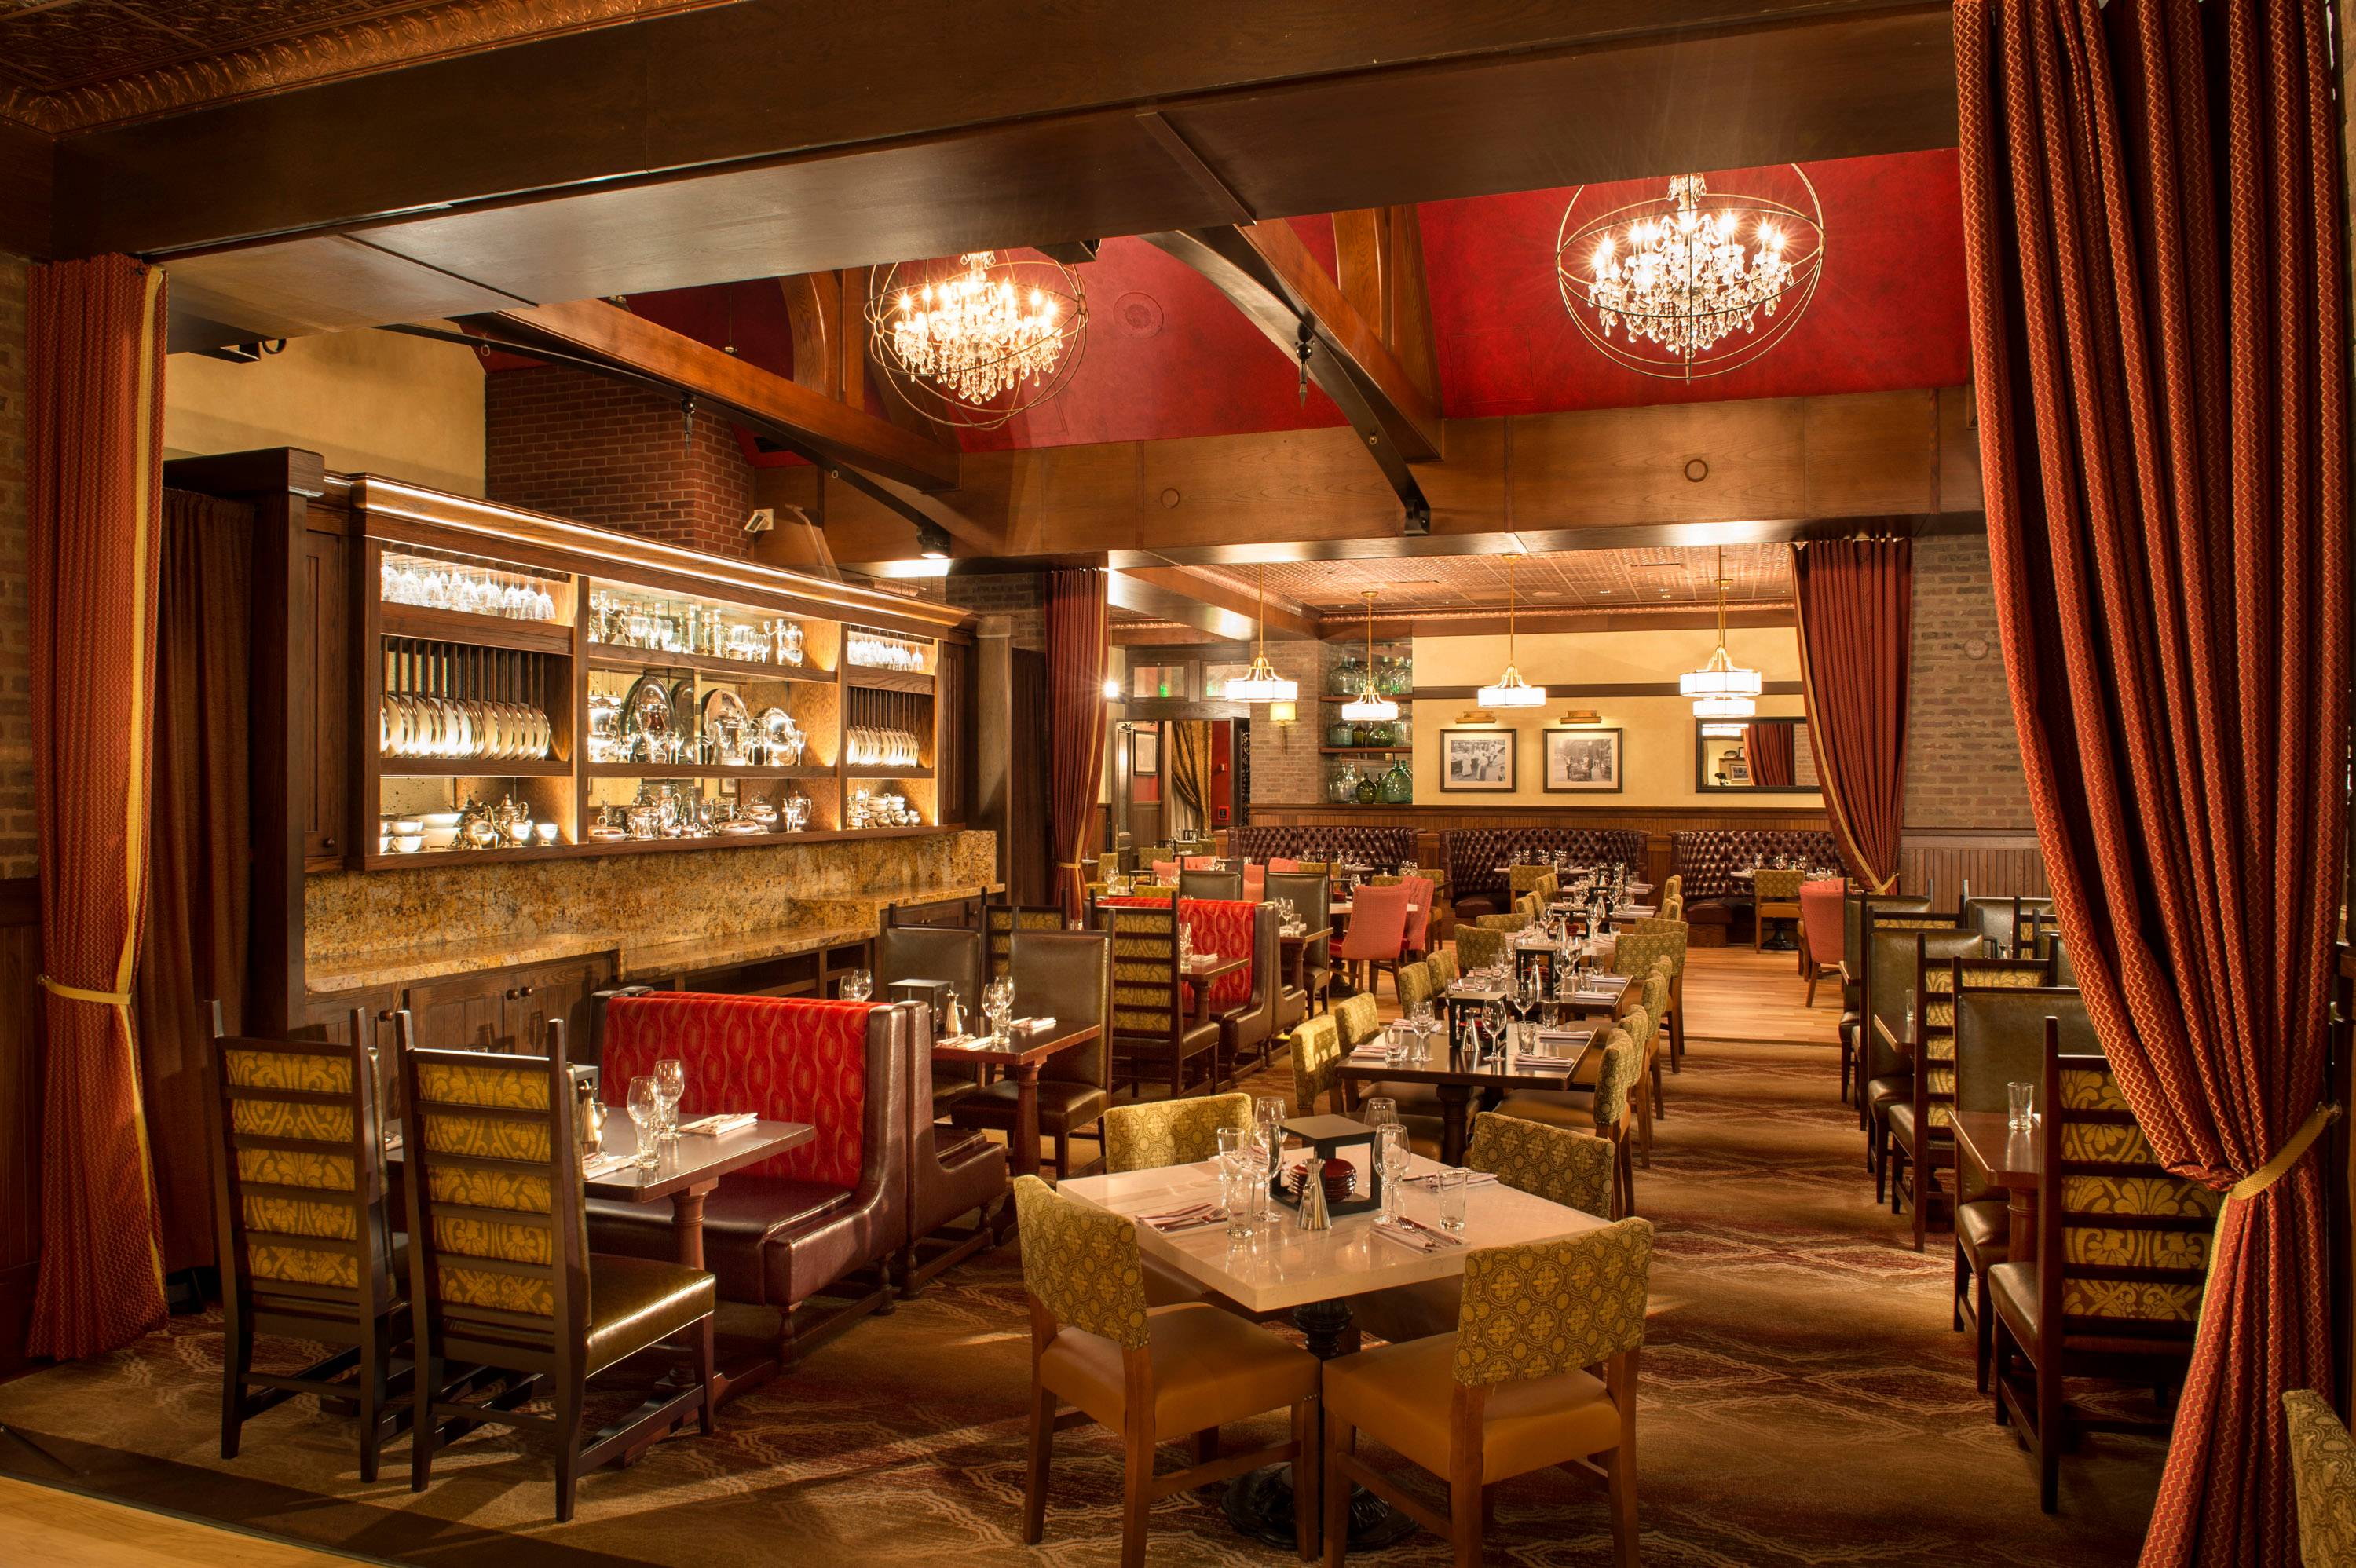 PHOTOS - A look inside the dining room at Trattoria al Forno on Disney's BoardWalk